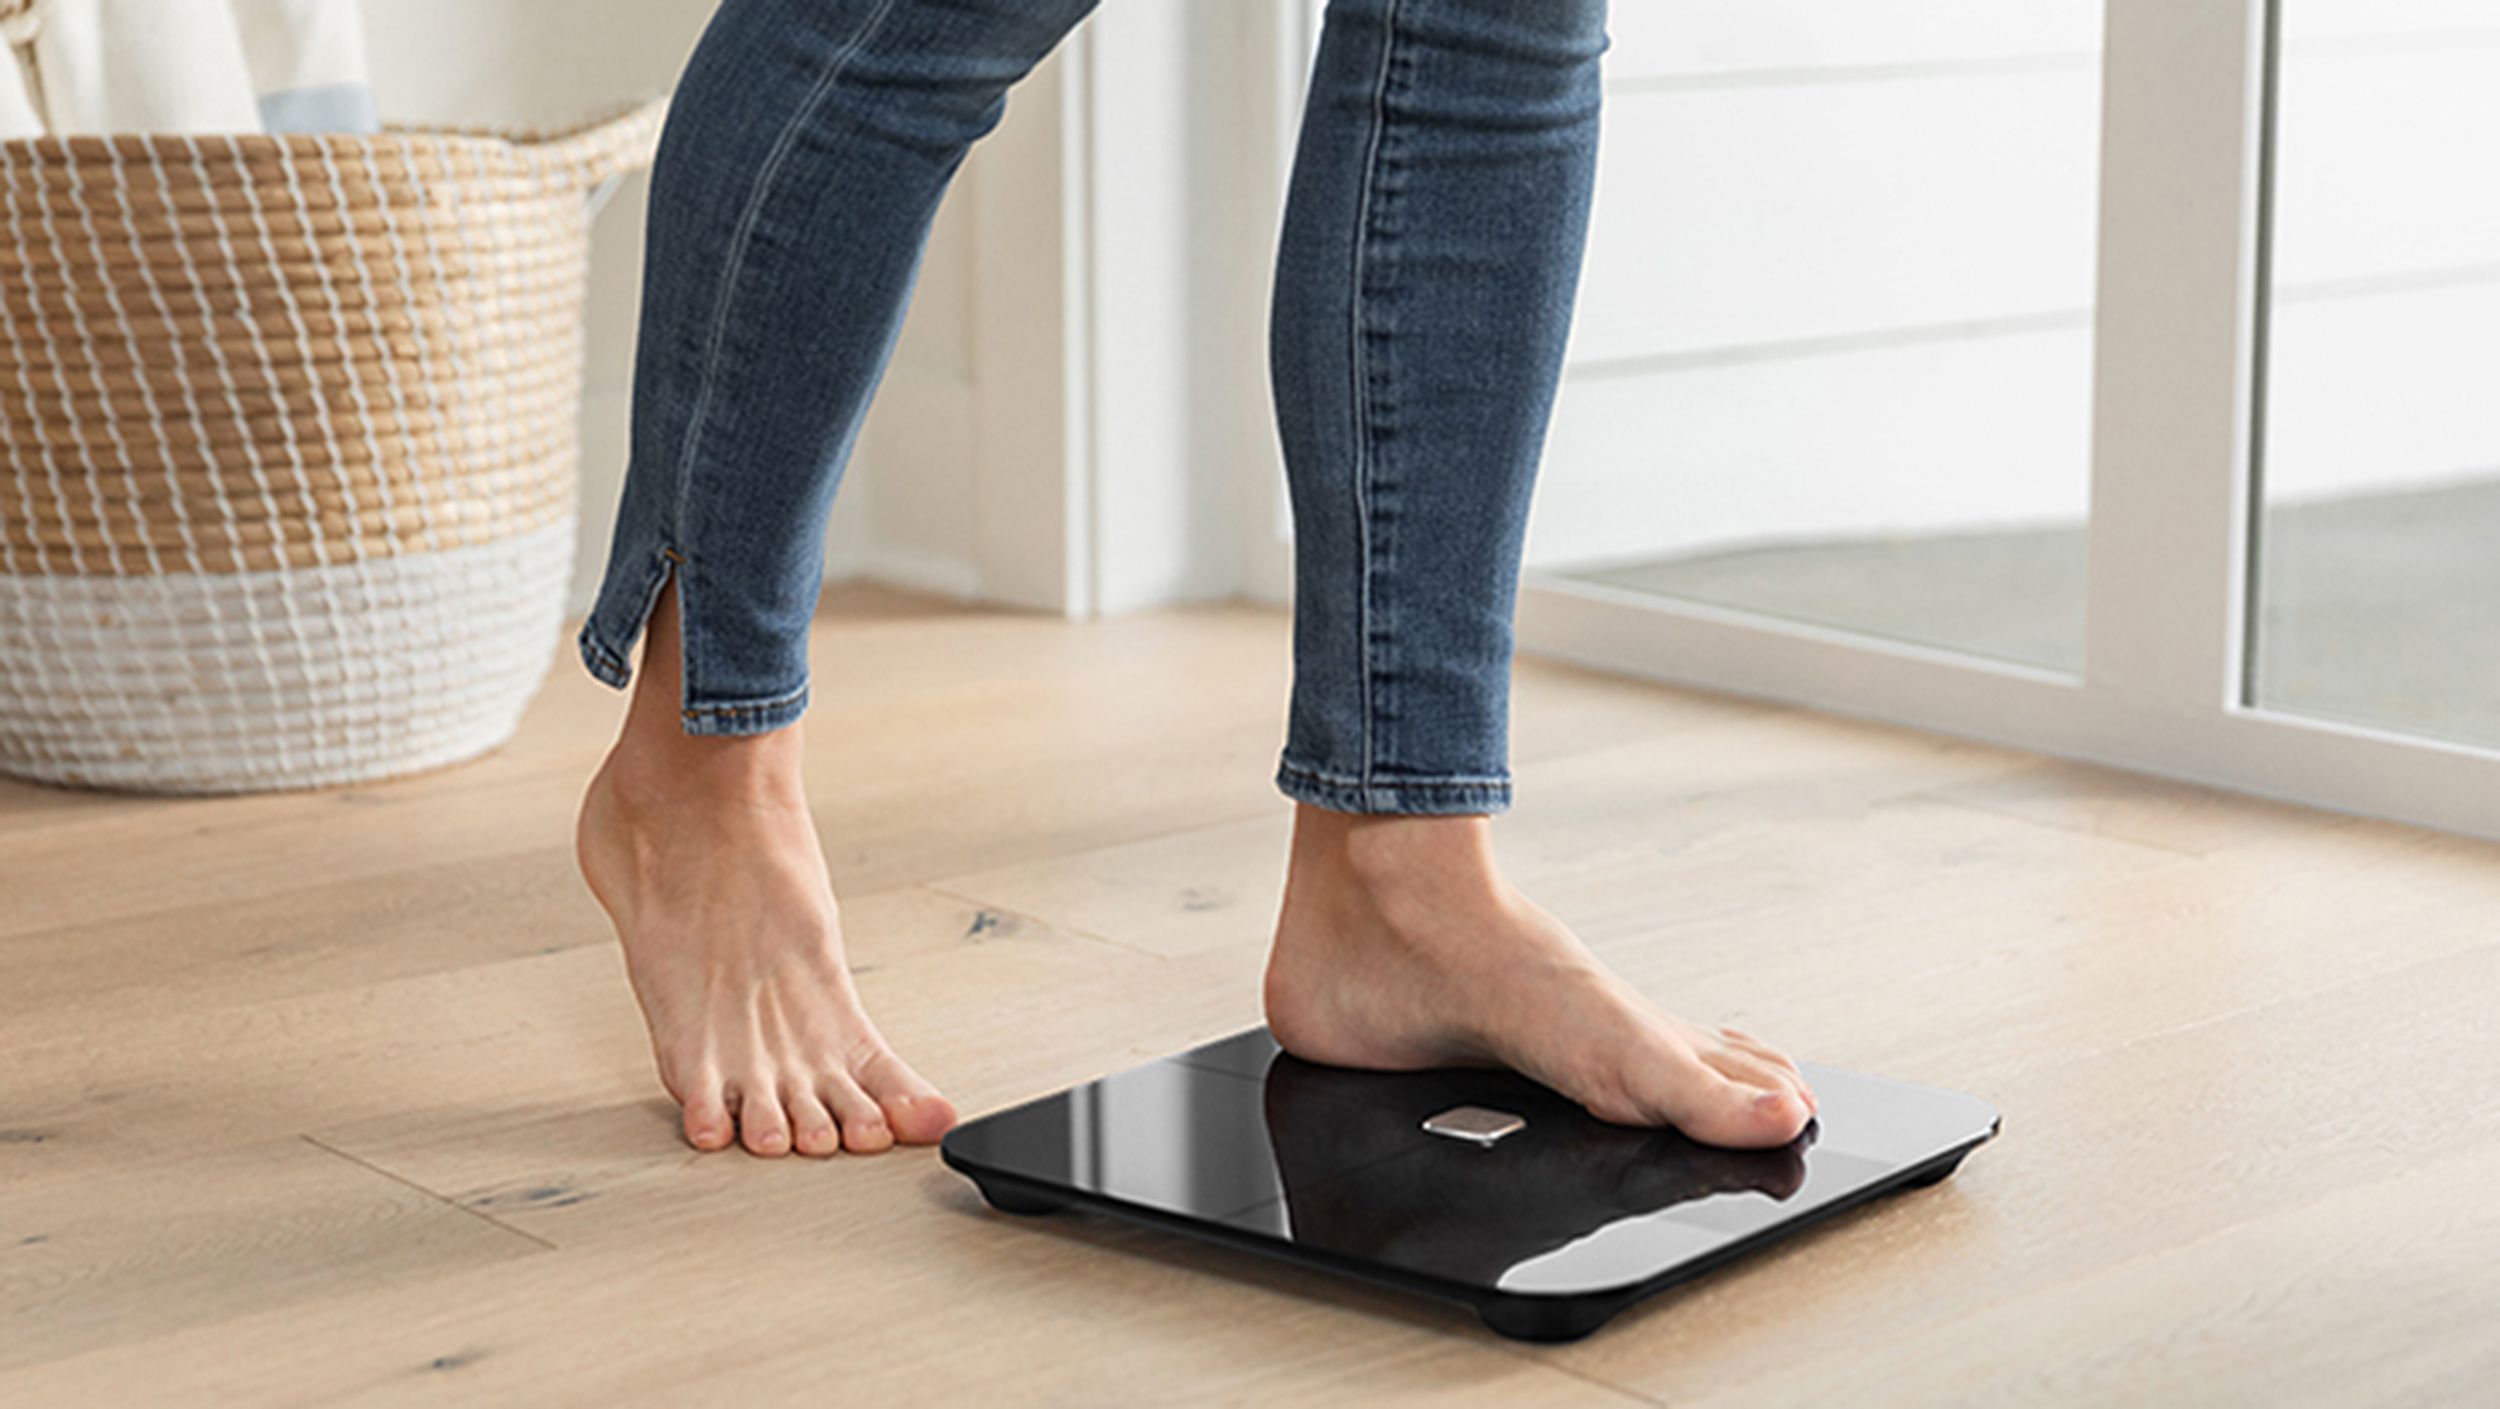 Body Comp - I'm having issues installing my scale. What should I